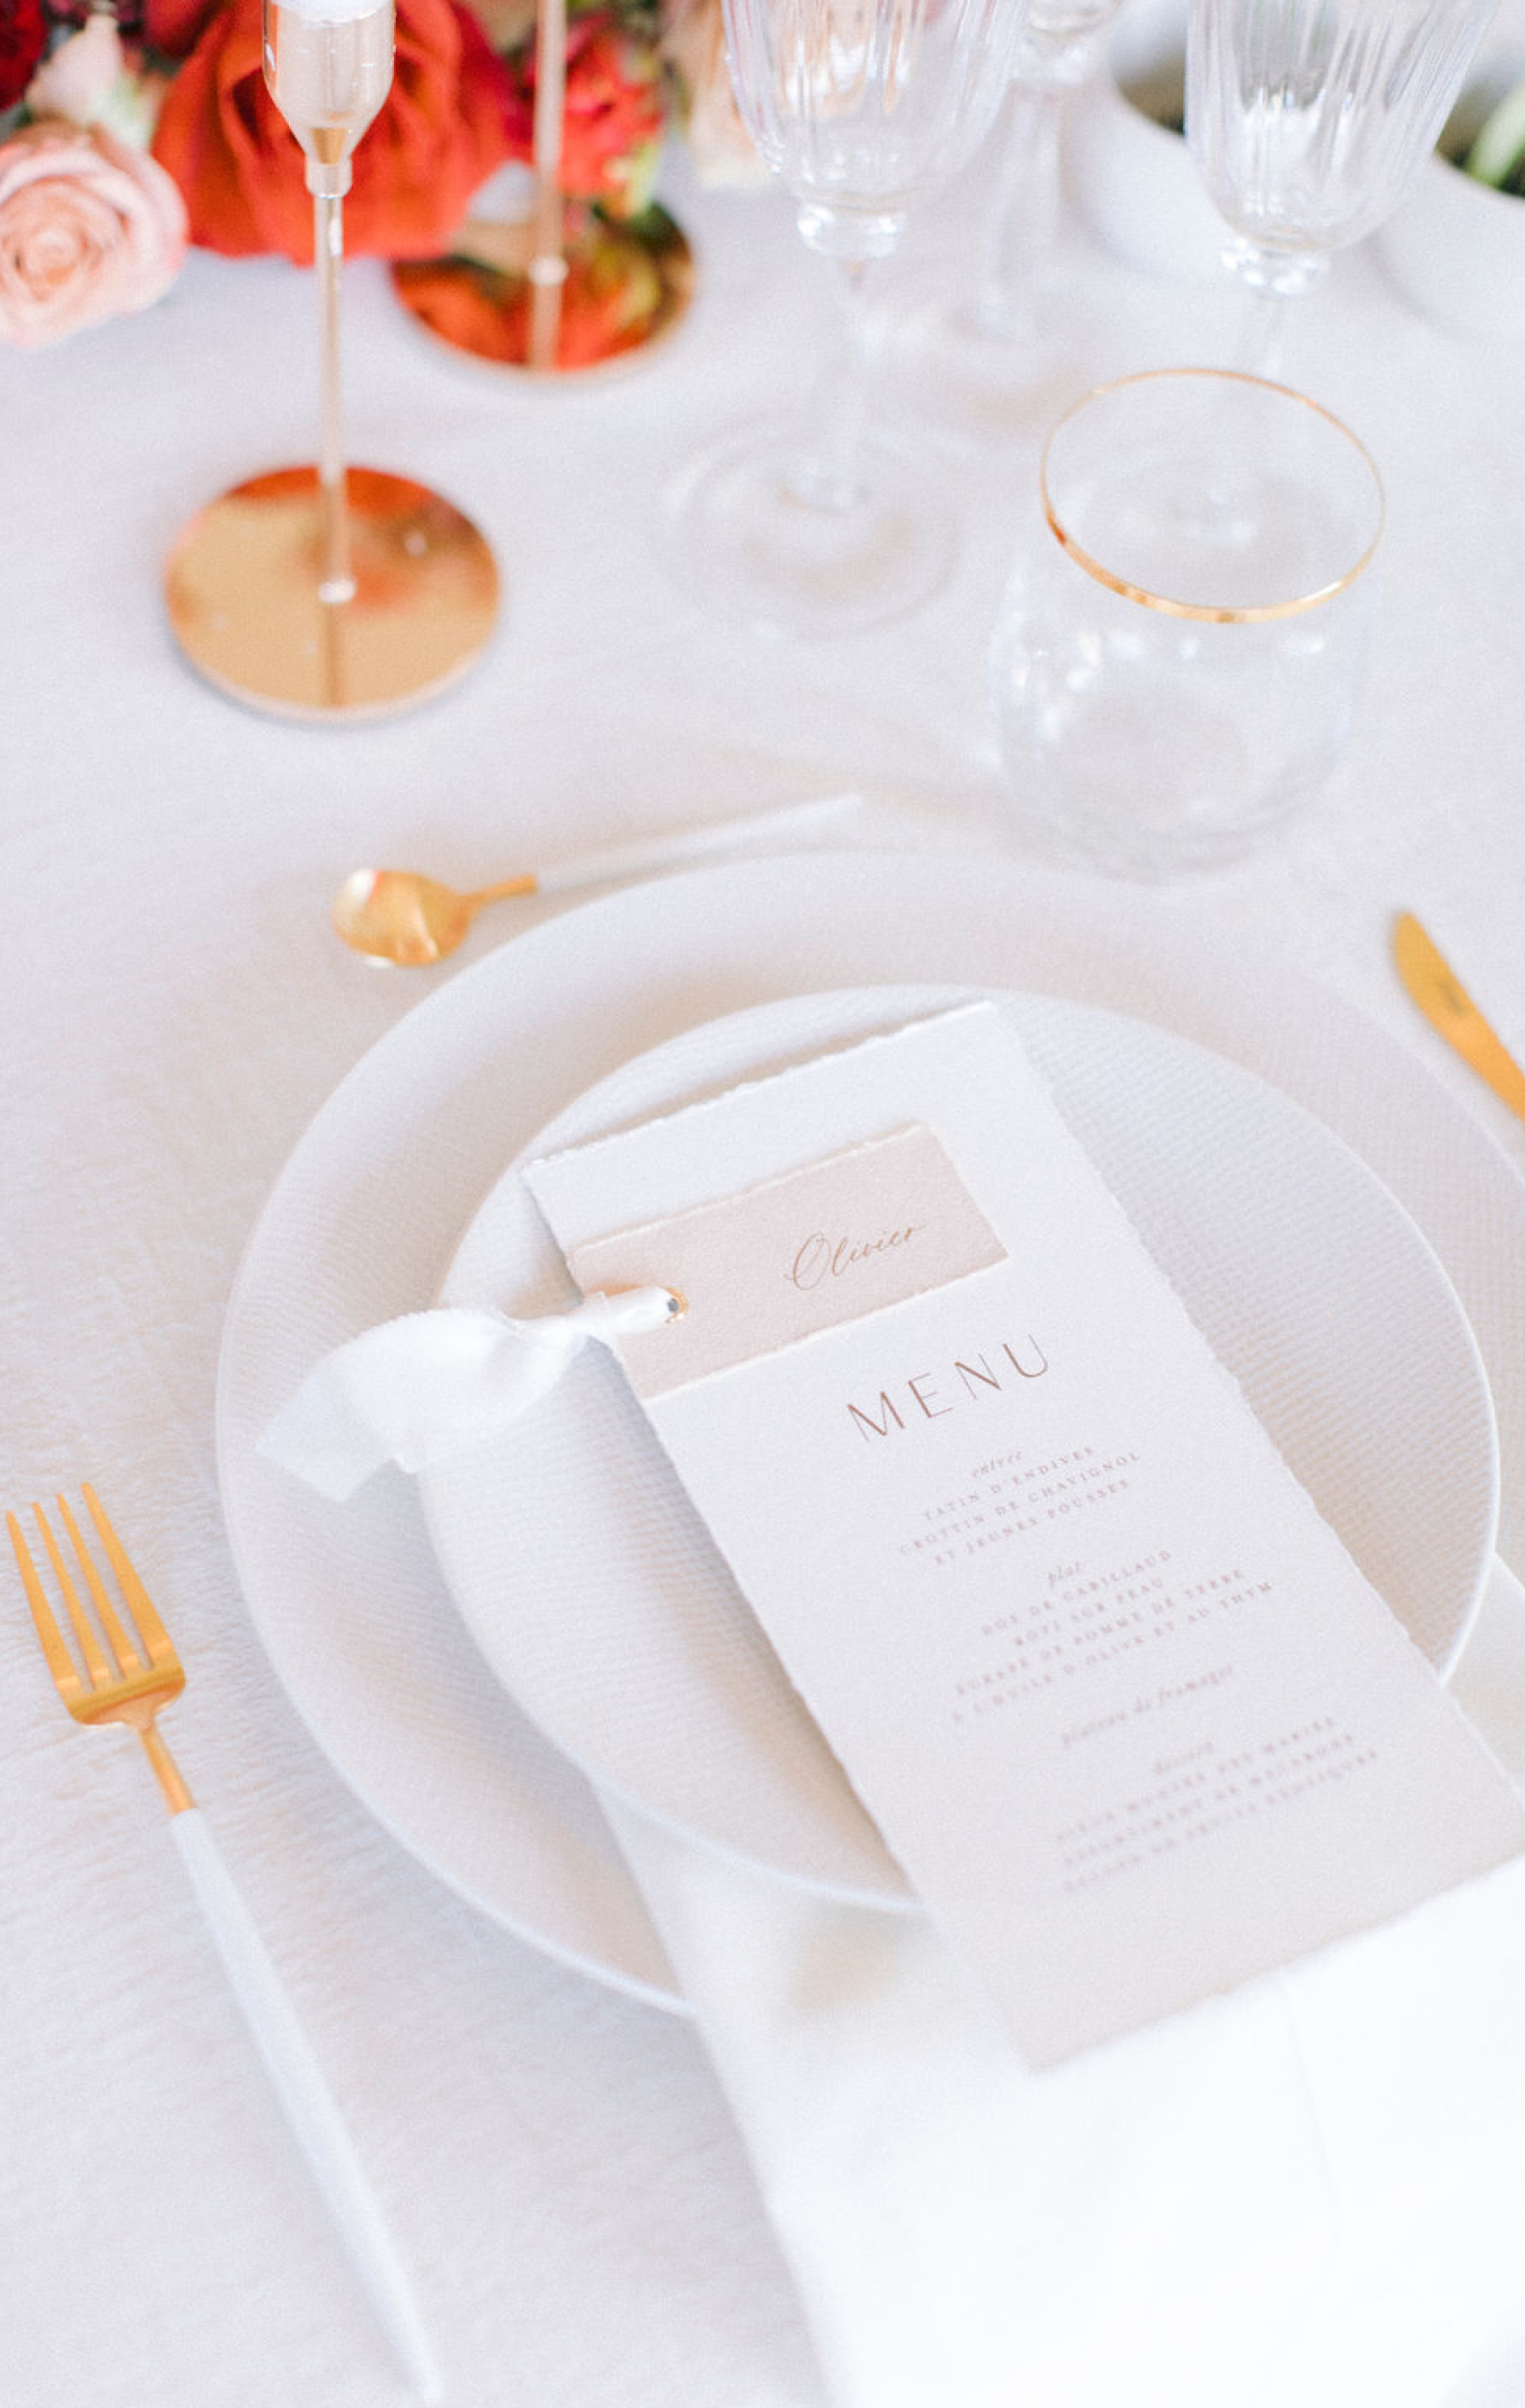 menu card with guest name